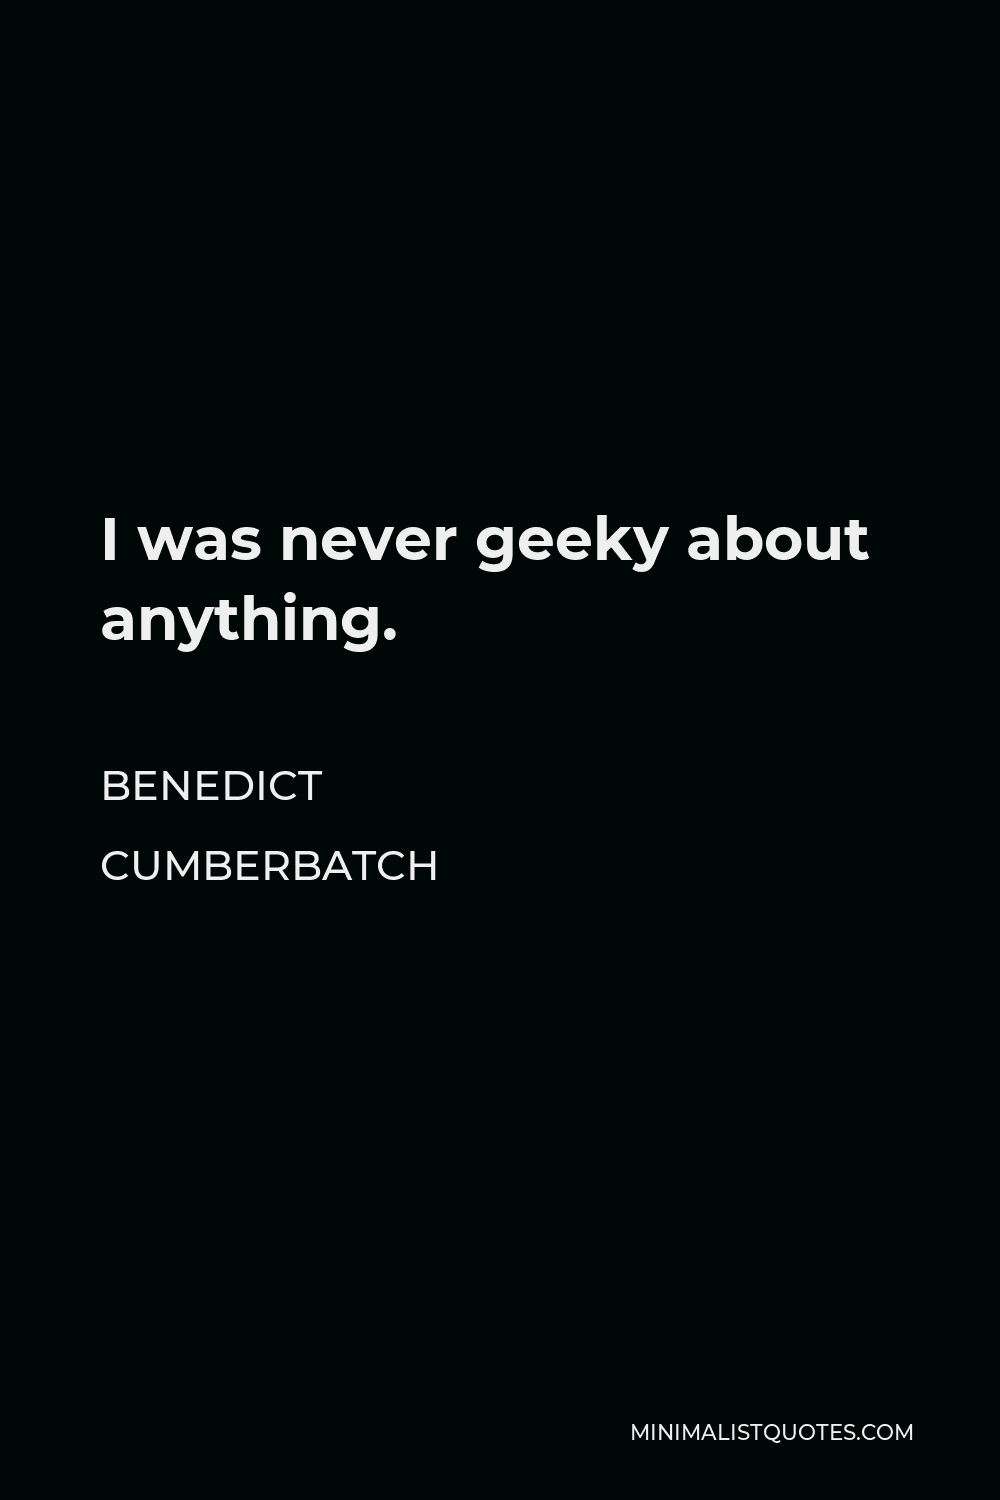 Benedict Cumberbatch Quote - I was never geeky about anything.